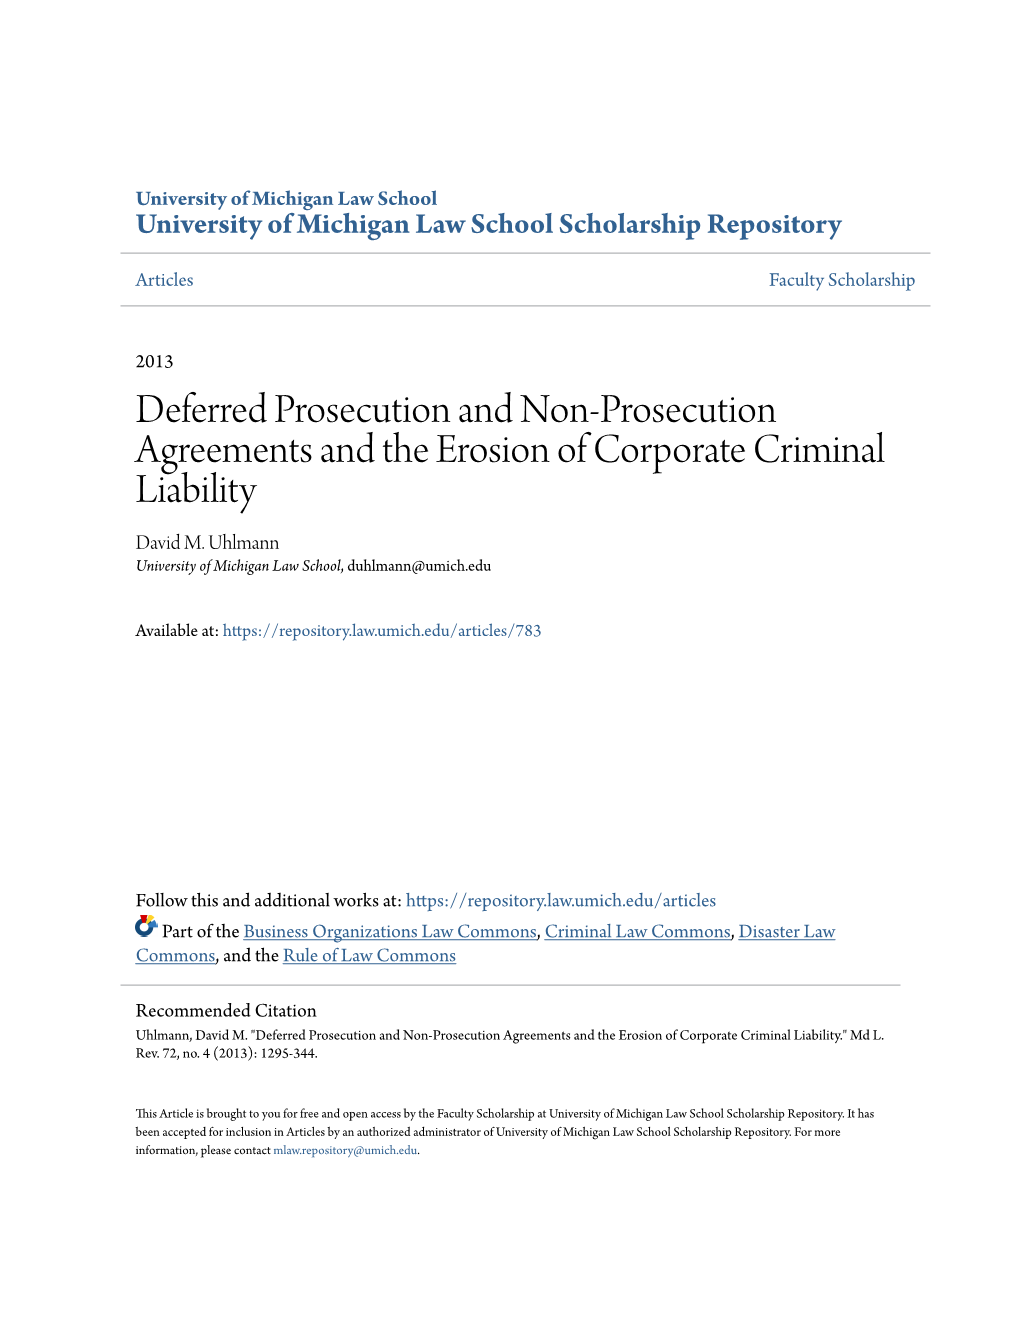 Deferred Prosecution and Non-Prosecution Agreements and the Erosion of Corporate Criminal Liability David M